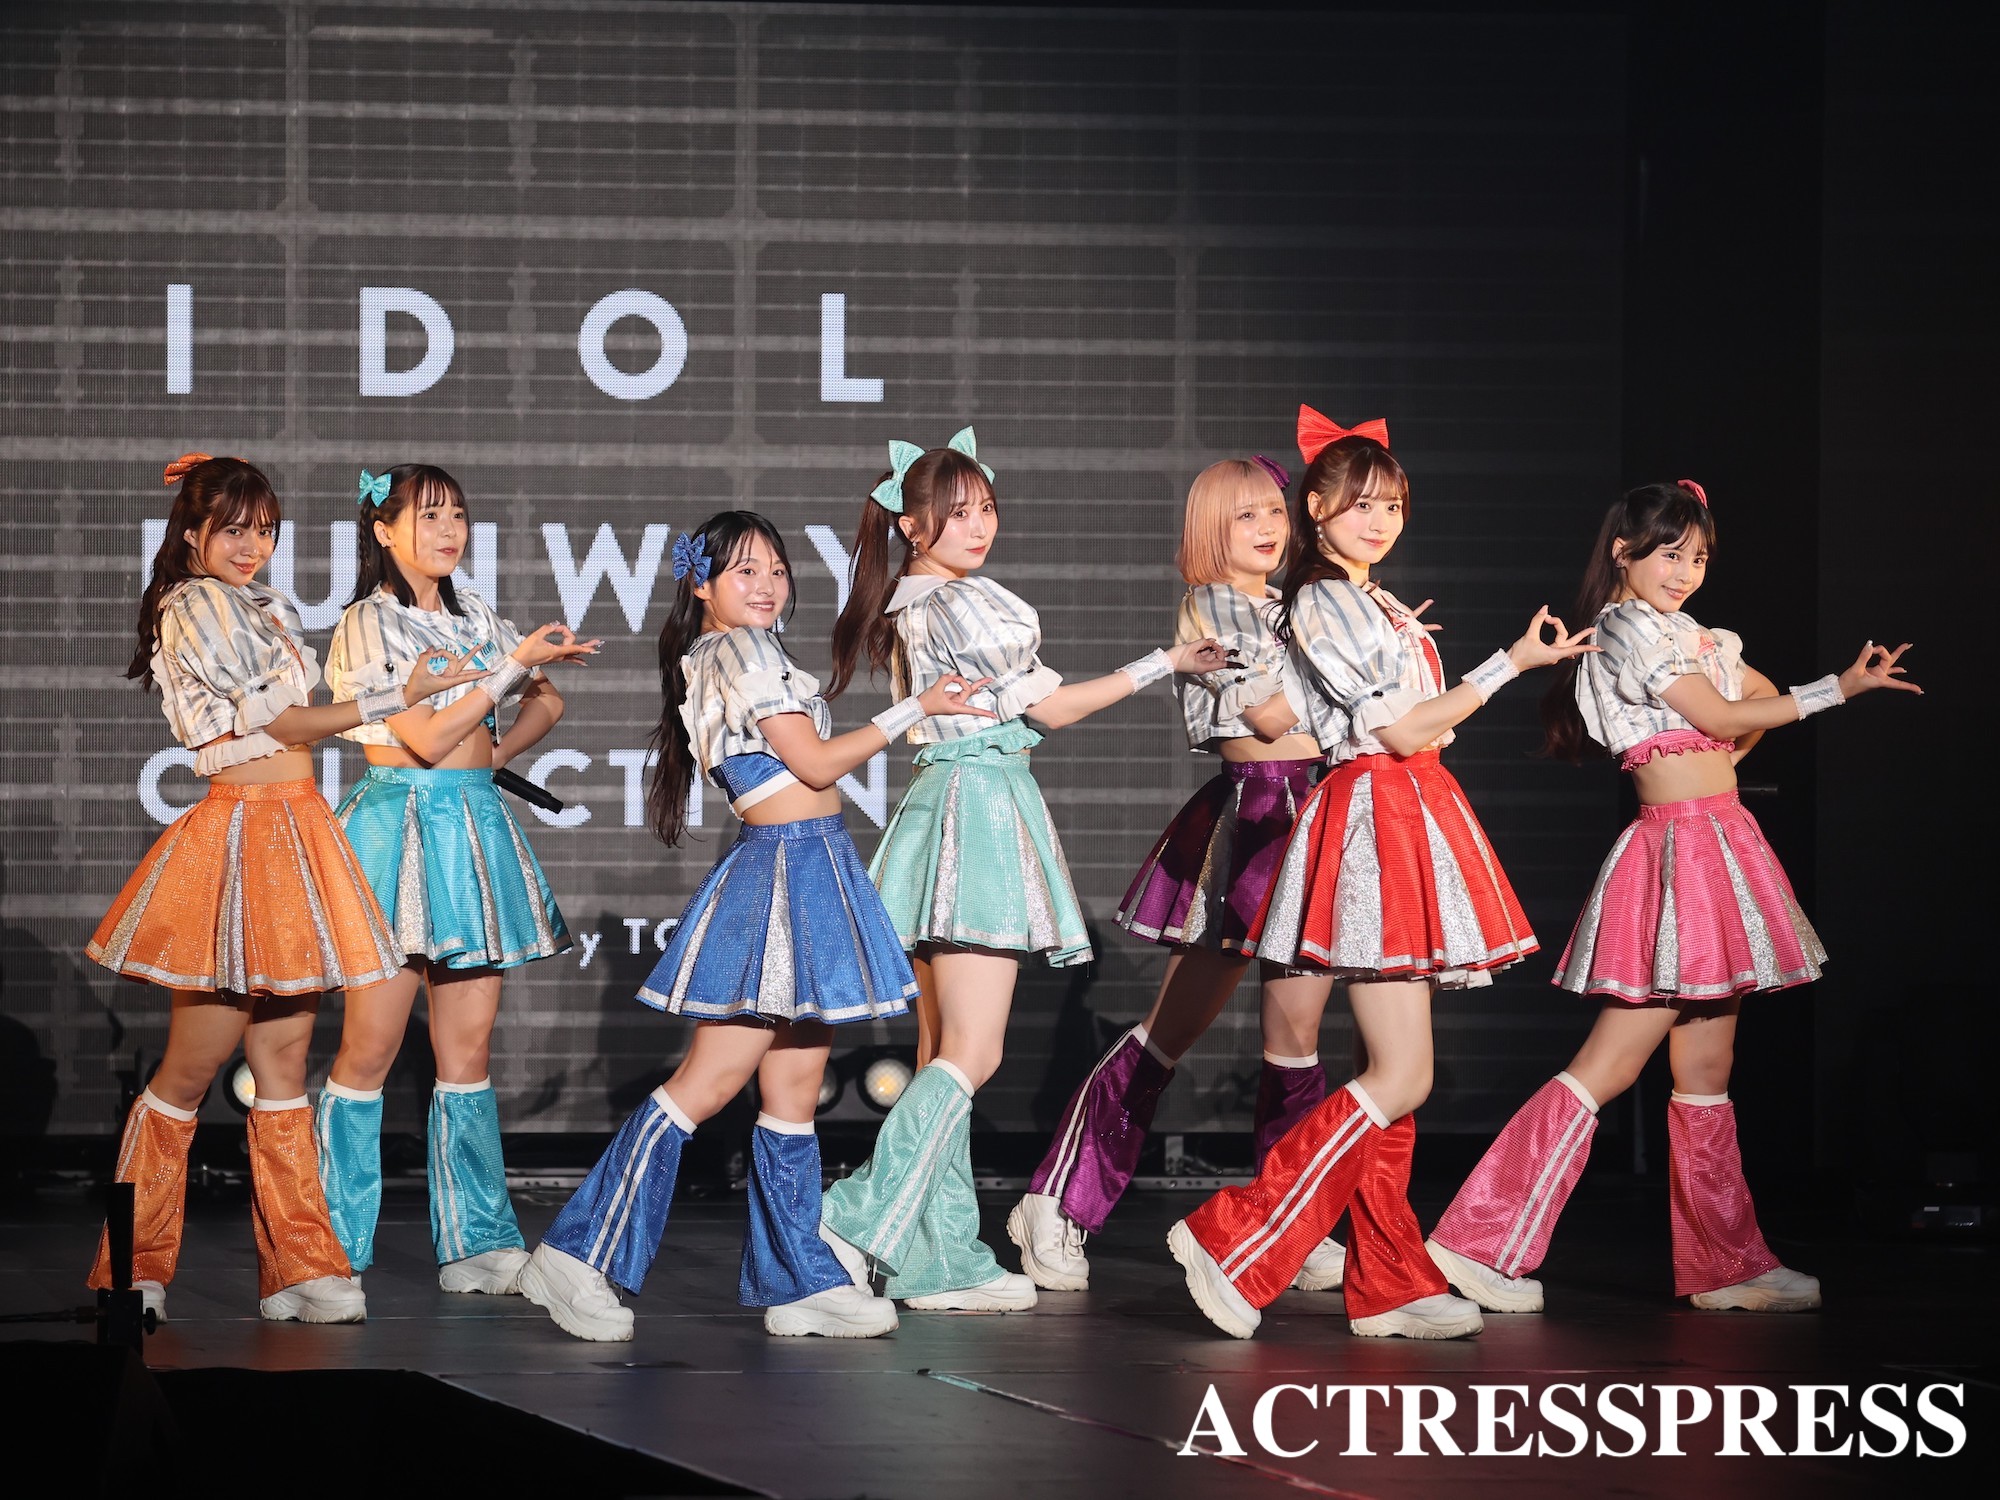 CANDY TUNE ／Ririmew STAGE in IDOL RUNWAY COLLECTION Supported by TGC. ACTRESS PRESS